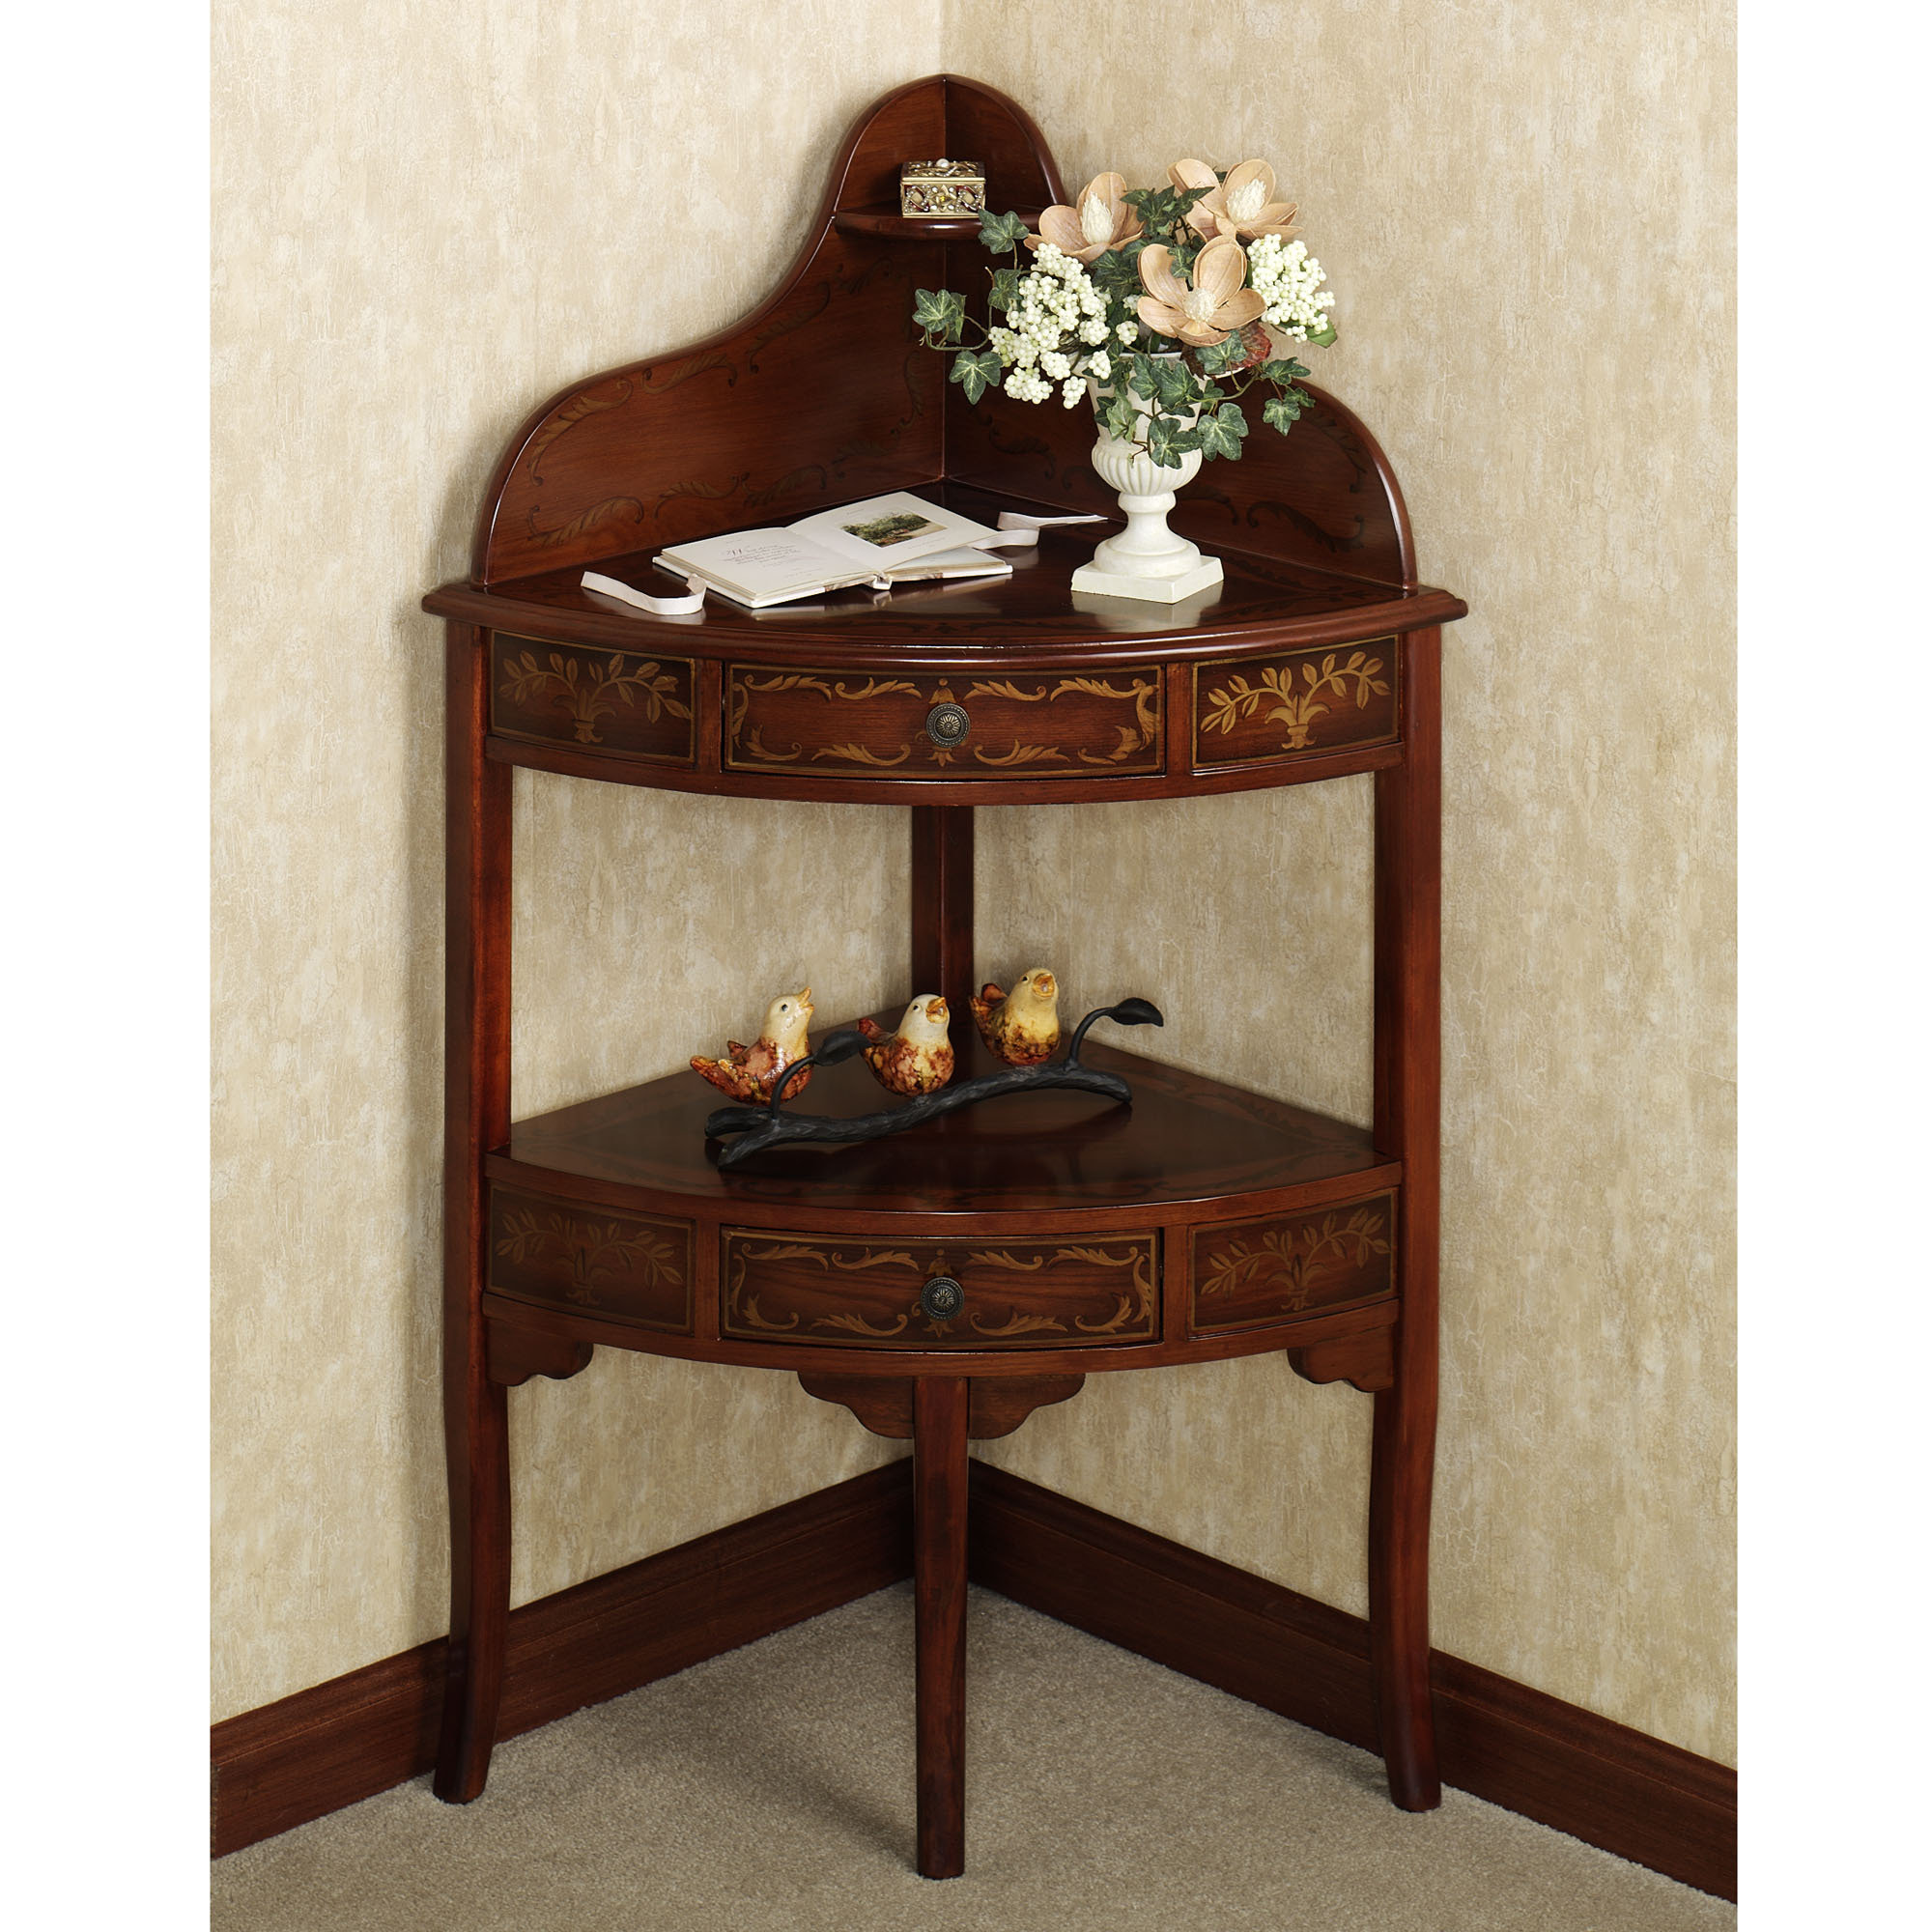 terrific triangle corner table with amazing design ajara decor interior brown wooden curving fornt and drawers depend two shelves three legs placed the gray floor accent runner